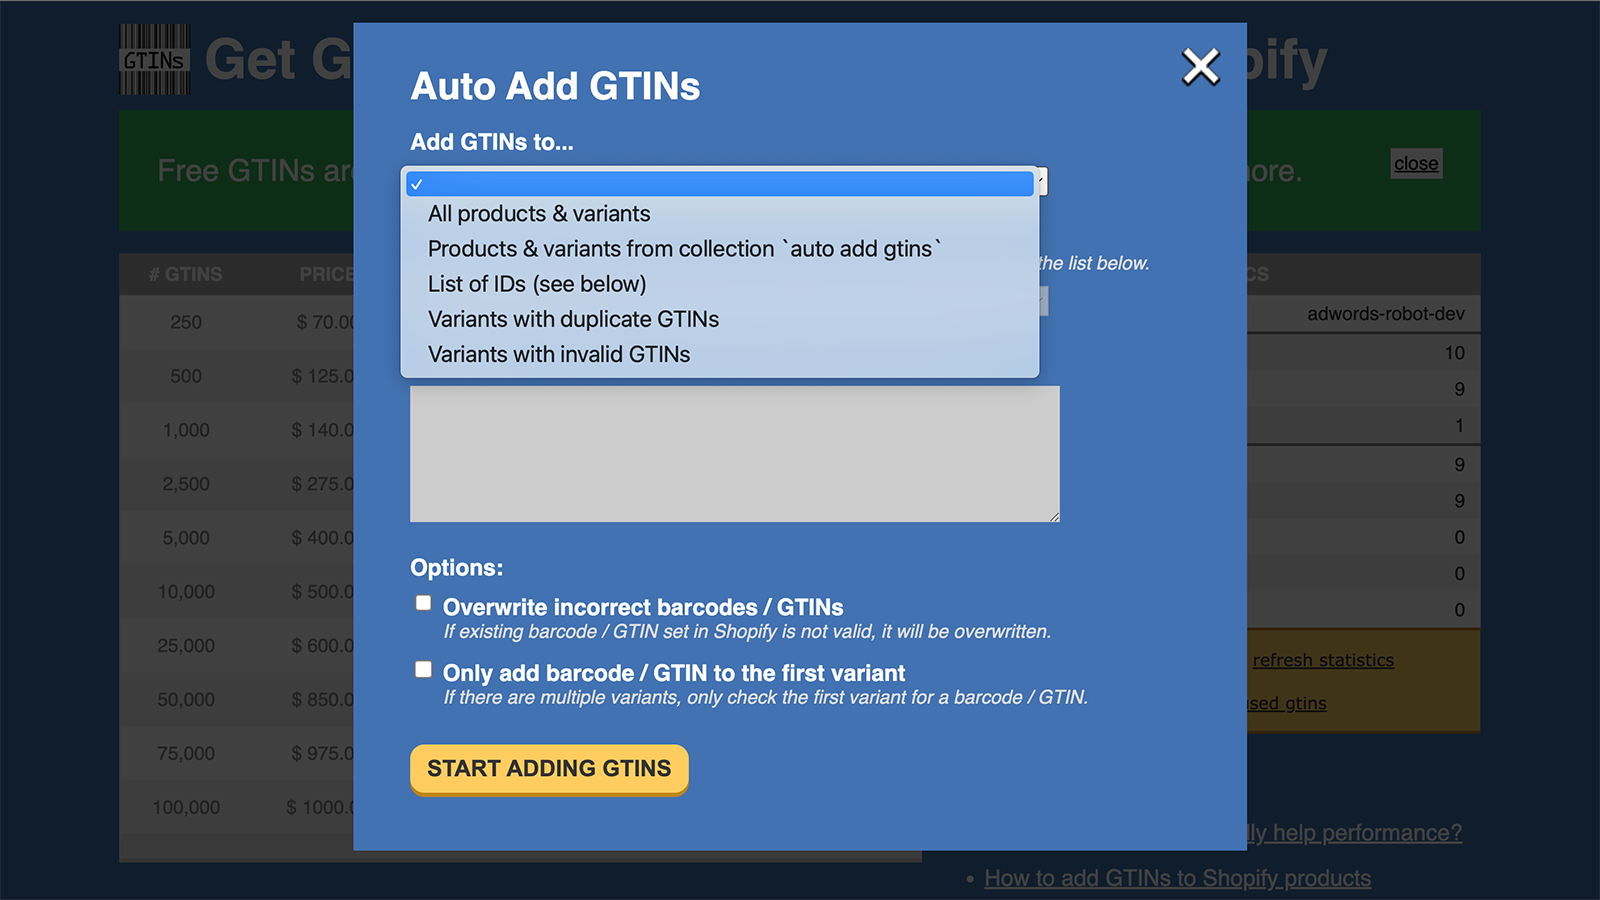 Add GTINs automatically to save time